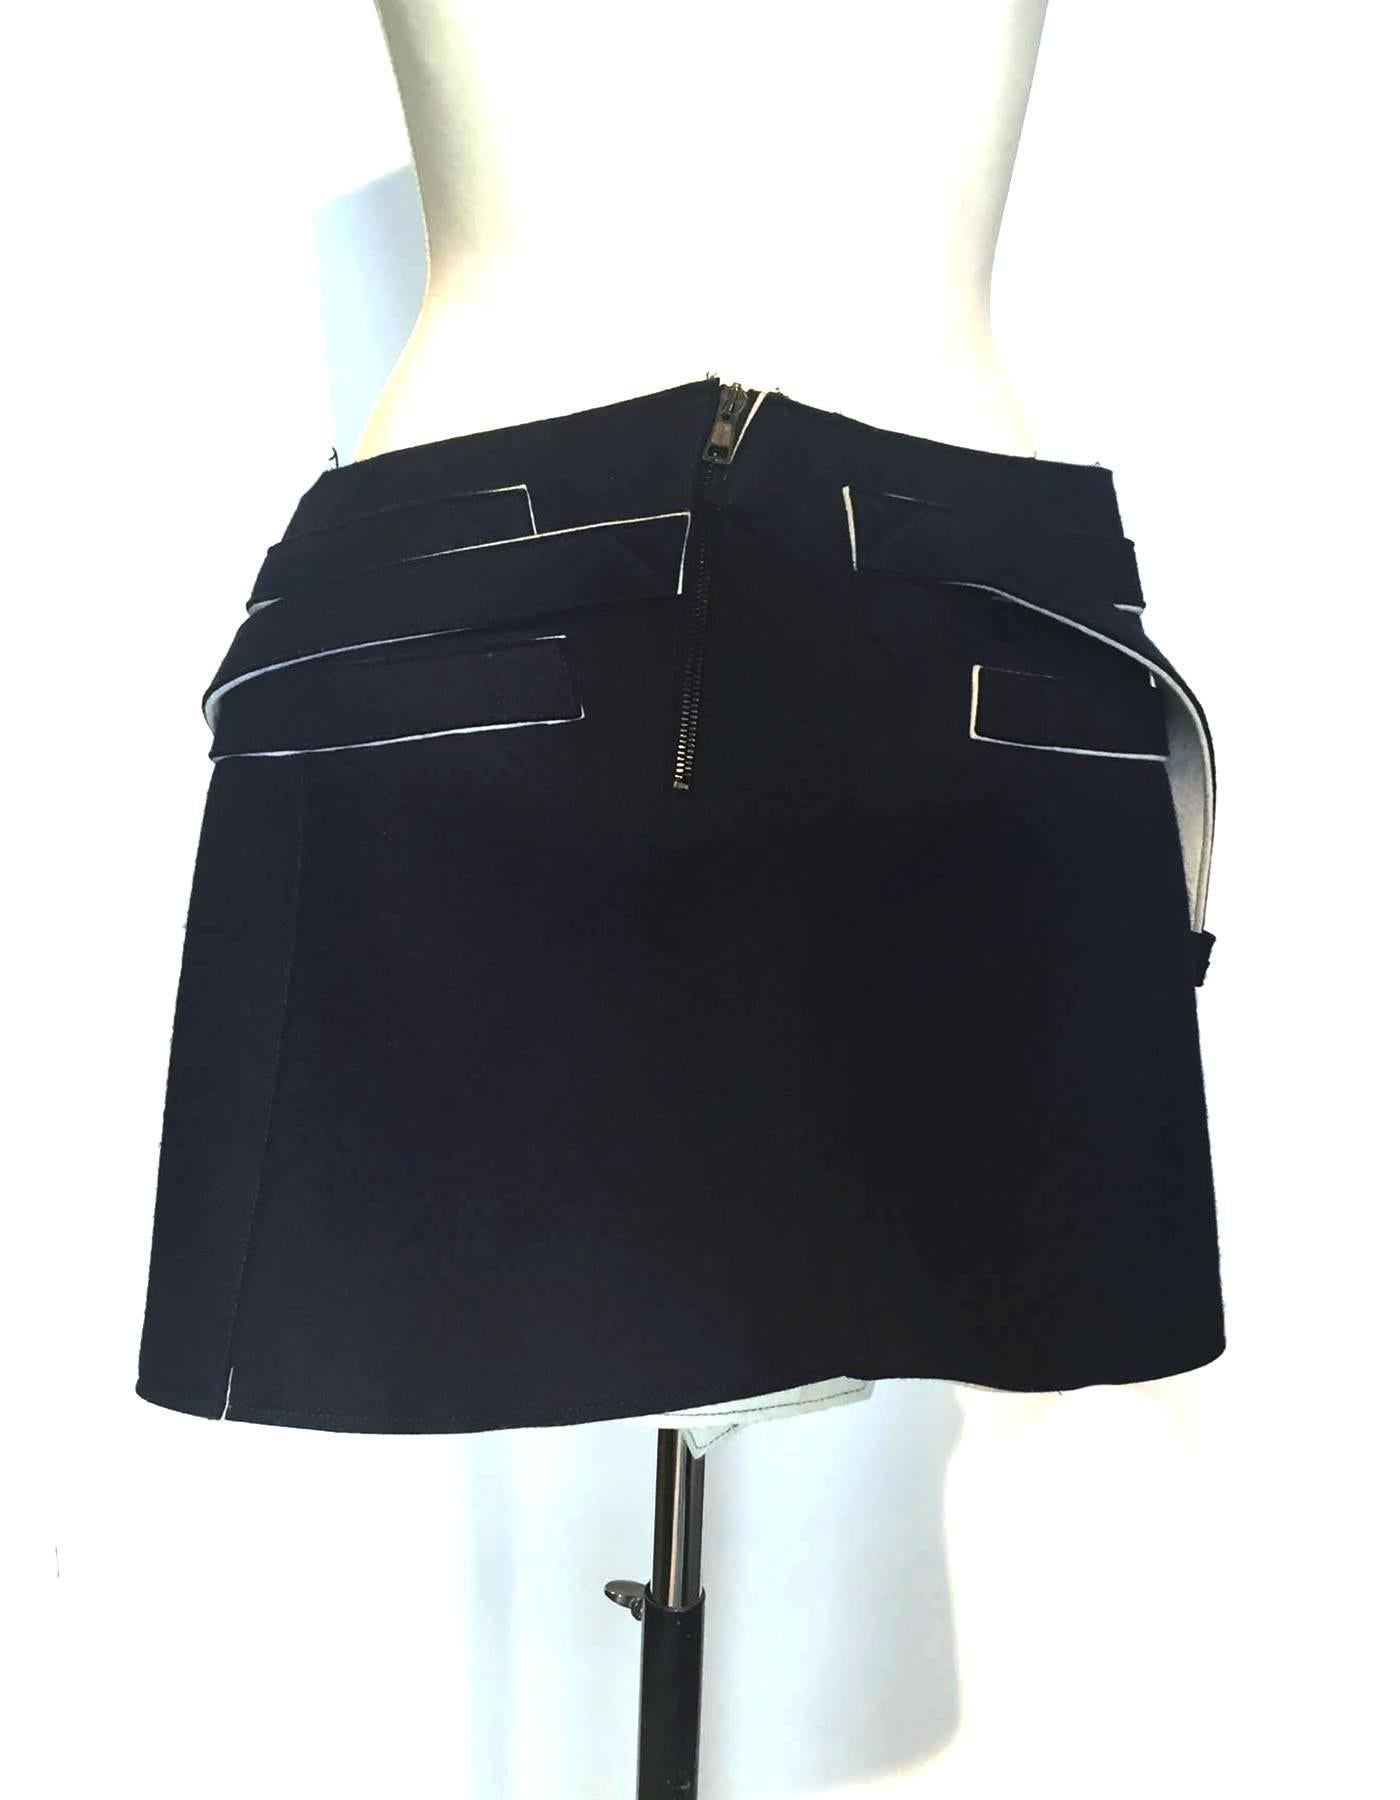 Skirt is cut just above knees, and has cool belt details, definitely a classic with a twist from Balenciaga.